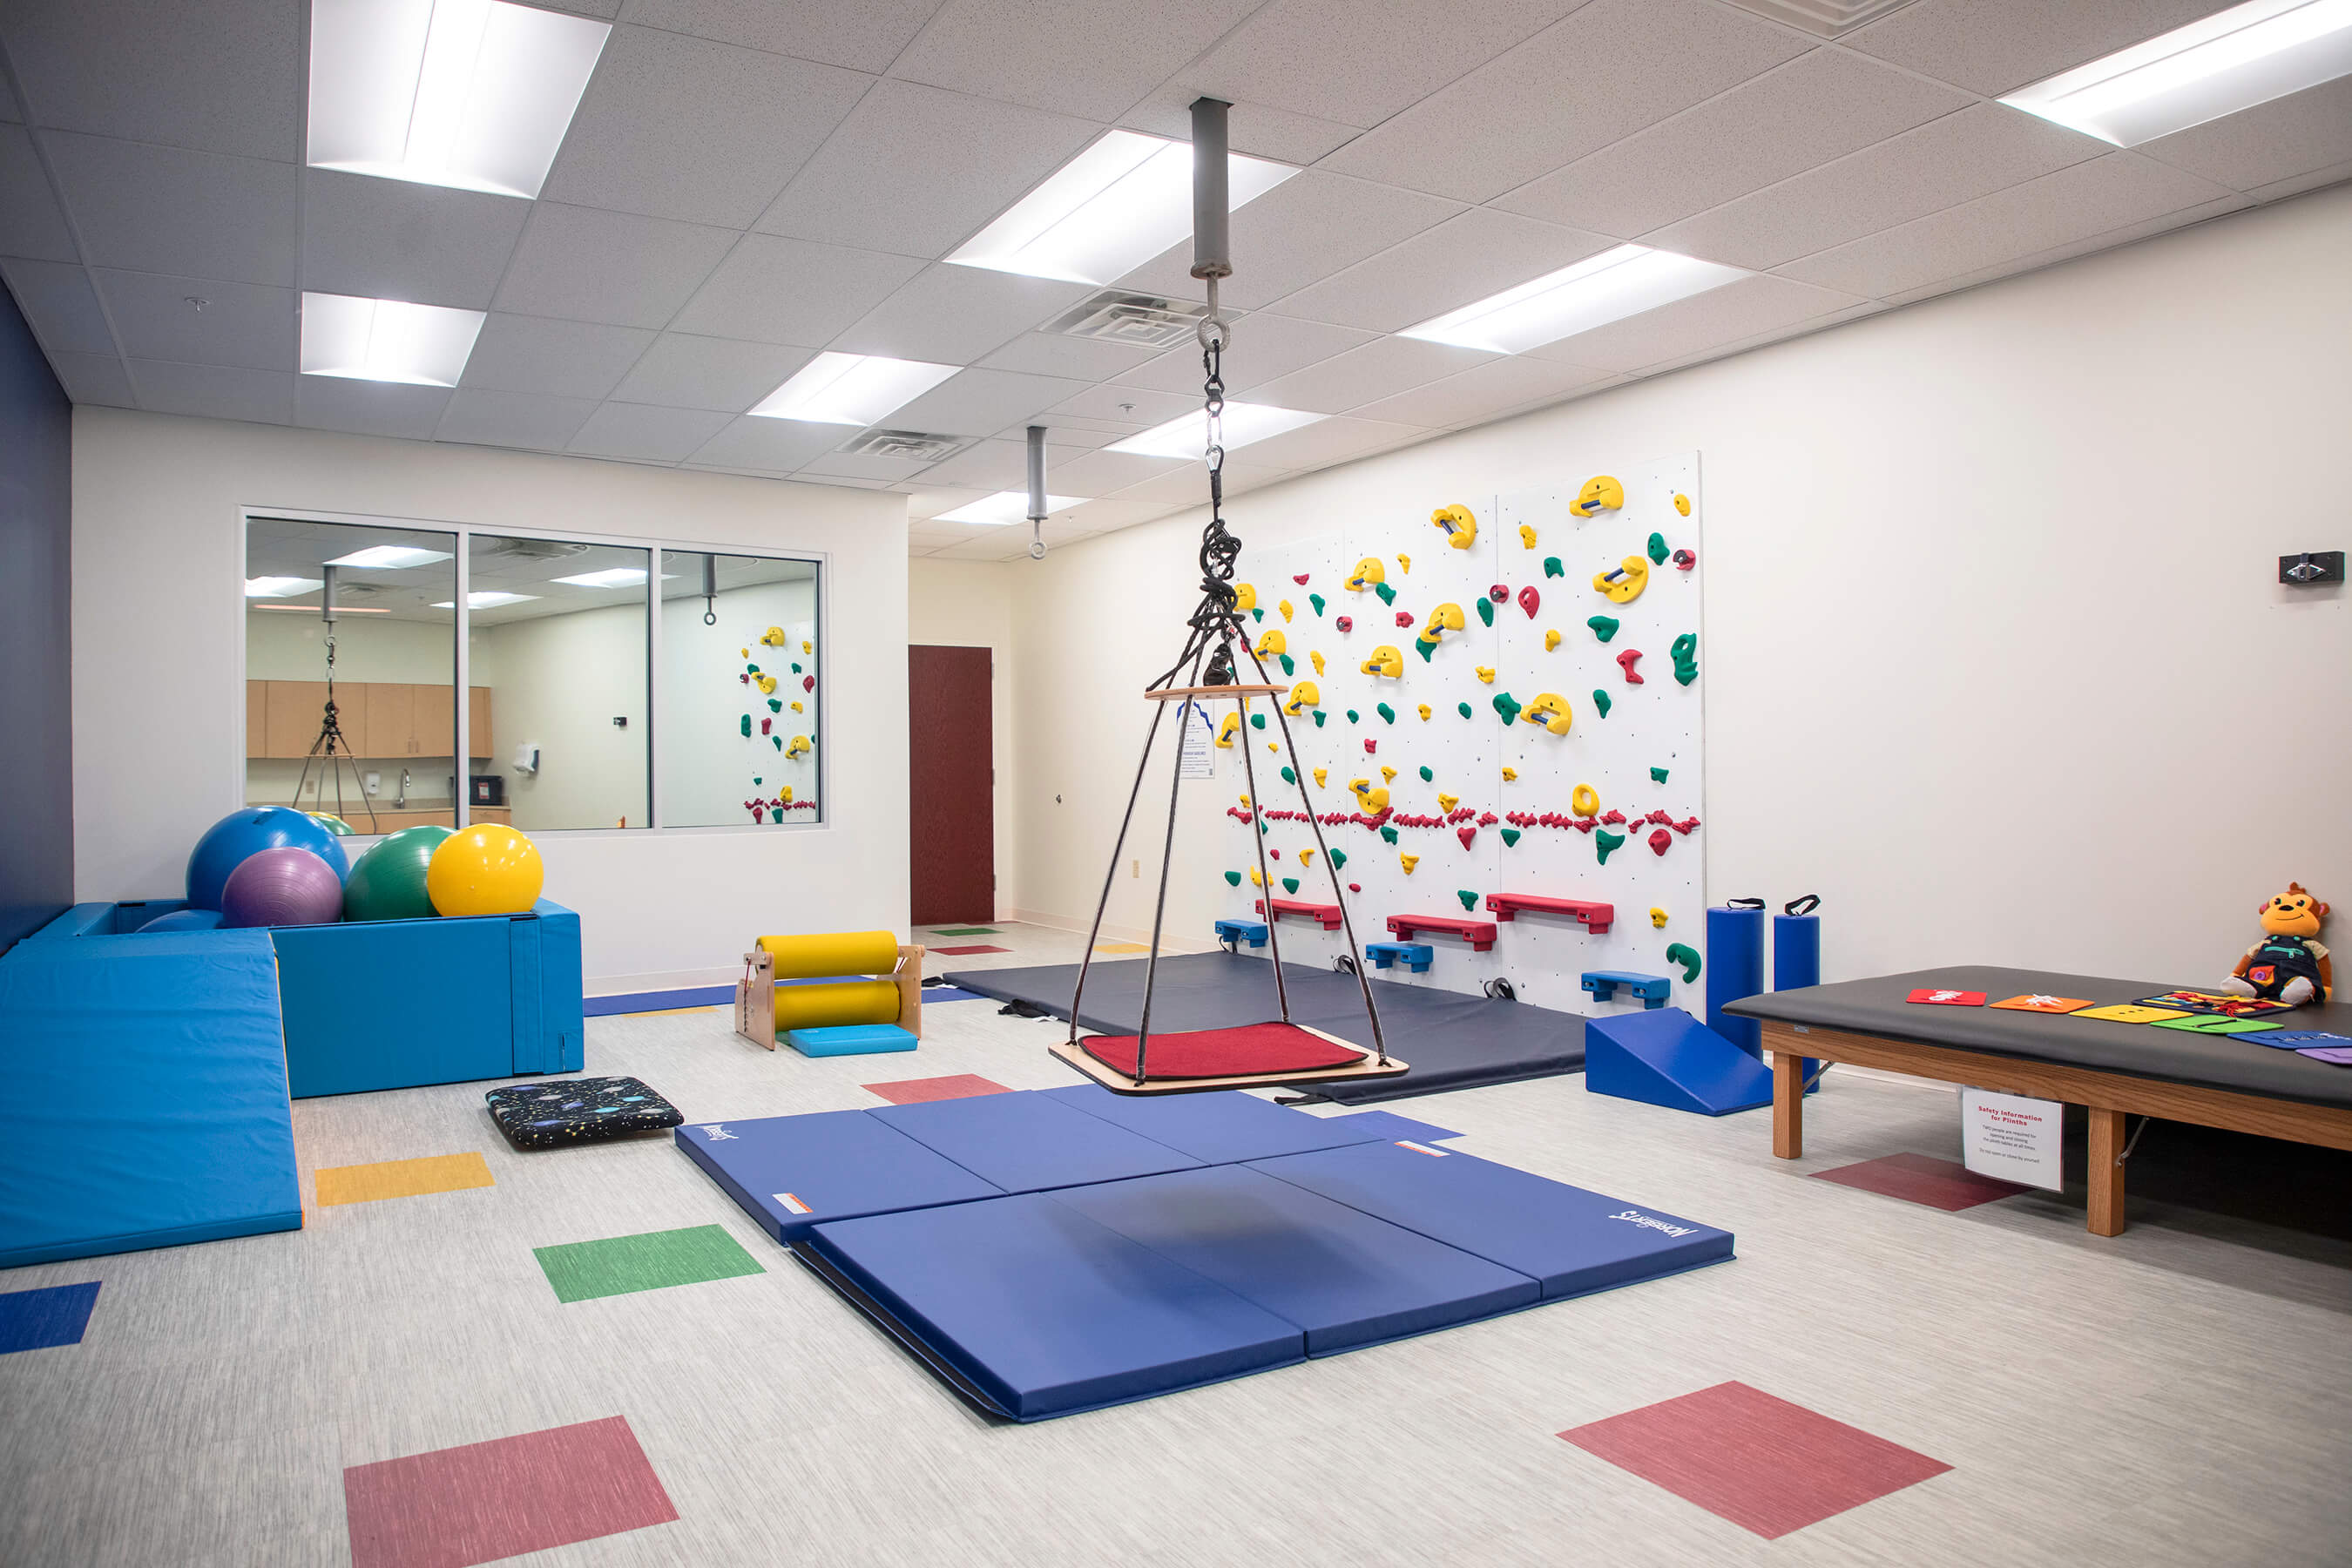 With a rock-climbing wall, ball pit, slide, and other kid-friendly activities, our Pediatric Lab provides a safe, engaging, and fun space while our students learn skilled techniques to work with children on their primary occupation--play